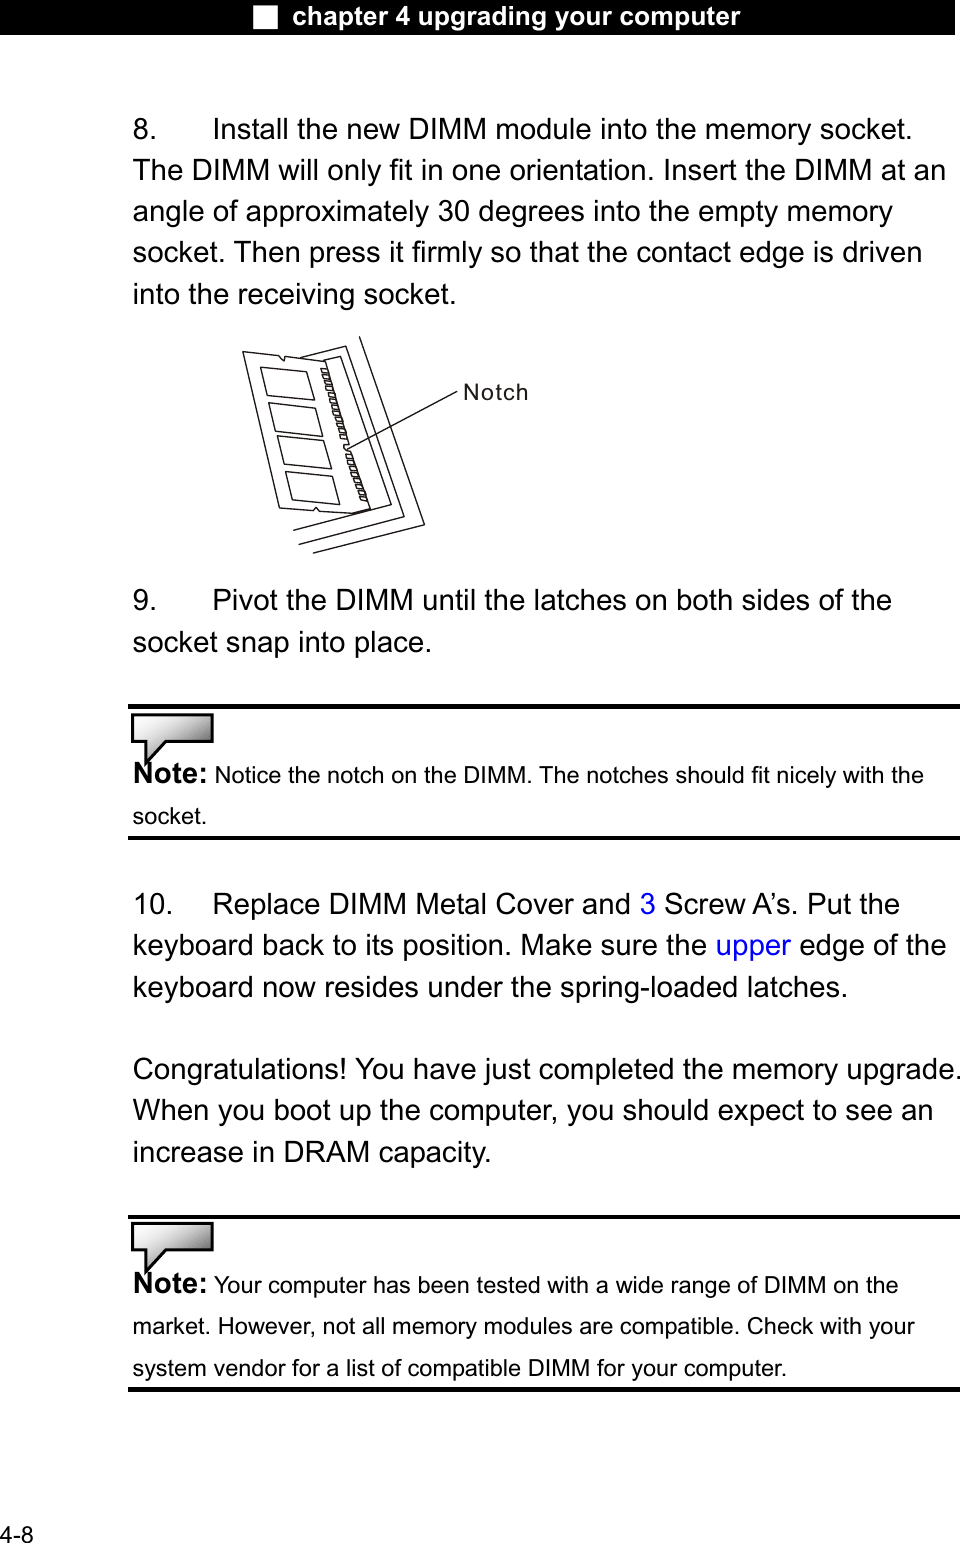 Ϯ chapter 4 upgrading your computer8. Install the new DIMM module into the memory socket.The DIMM will only fit in one orientation. Insert the DIMM at an angle of approximately 30 degrees into the empty memorysocket. Then press it firmly so that the contact edge is driven into the receiving socket.Notch9. Pivot the DIMM until the latches on both sides of the socket snap into place. Note: Notice the notch on the DIMM. The notches should fit nicely with thesocket.10. Replace DIMM Metal Cover and 3 Screw A’s. Put the keyboard back to its position. Make sure the upper edge of the keyboard now resides under the spring-loaded latches.Congratulations! You have just completed the memory upgrade.When you boot up the computer, you should expect to see anincrease in DRAM capacity.Note: Your computer has been tested with a wide range of DIMM on the market. However, not all memory modules are compatible. Check with yoursystem vendor for a list of compatible DIMM for your computer.4-8